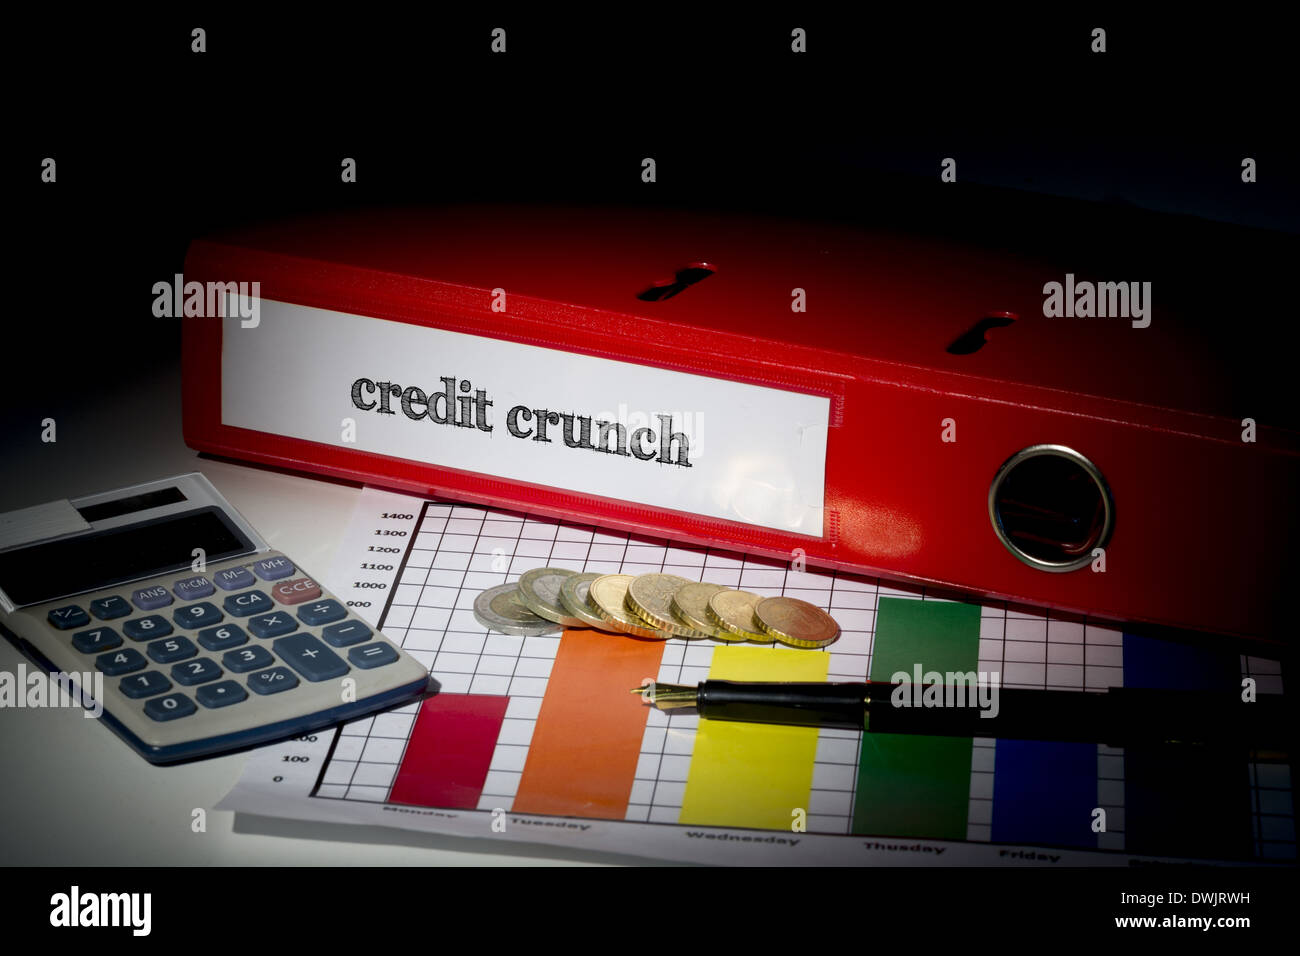 Credit crunch on red business binder Stock Photo